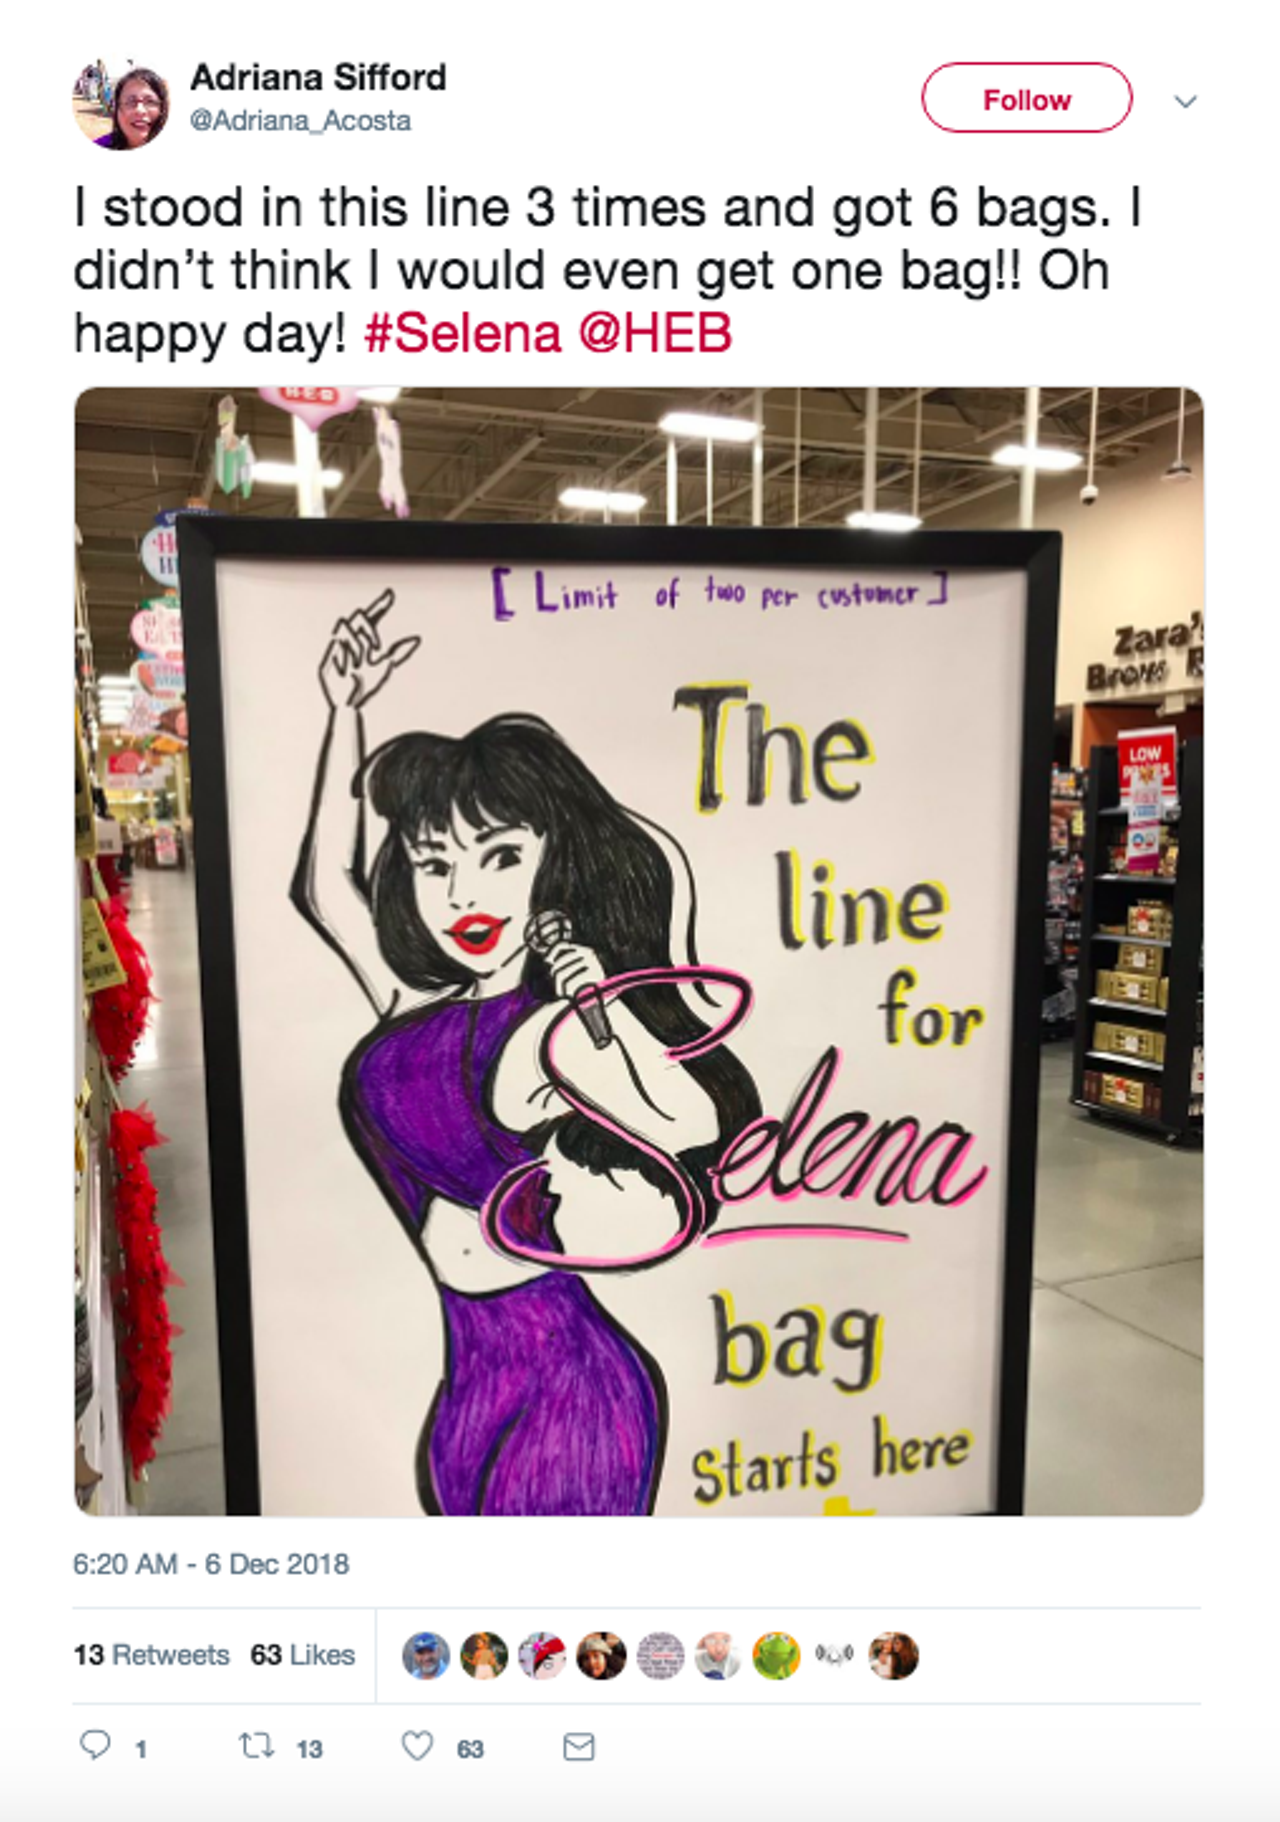 Twitter Users Have A Lot of Feelings About the Limited Edition Selena Bags Available at H-E-B